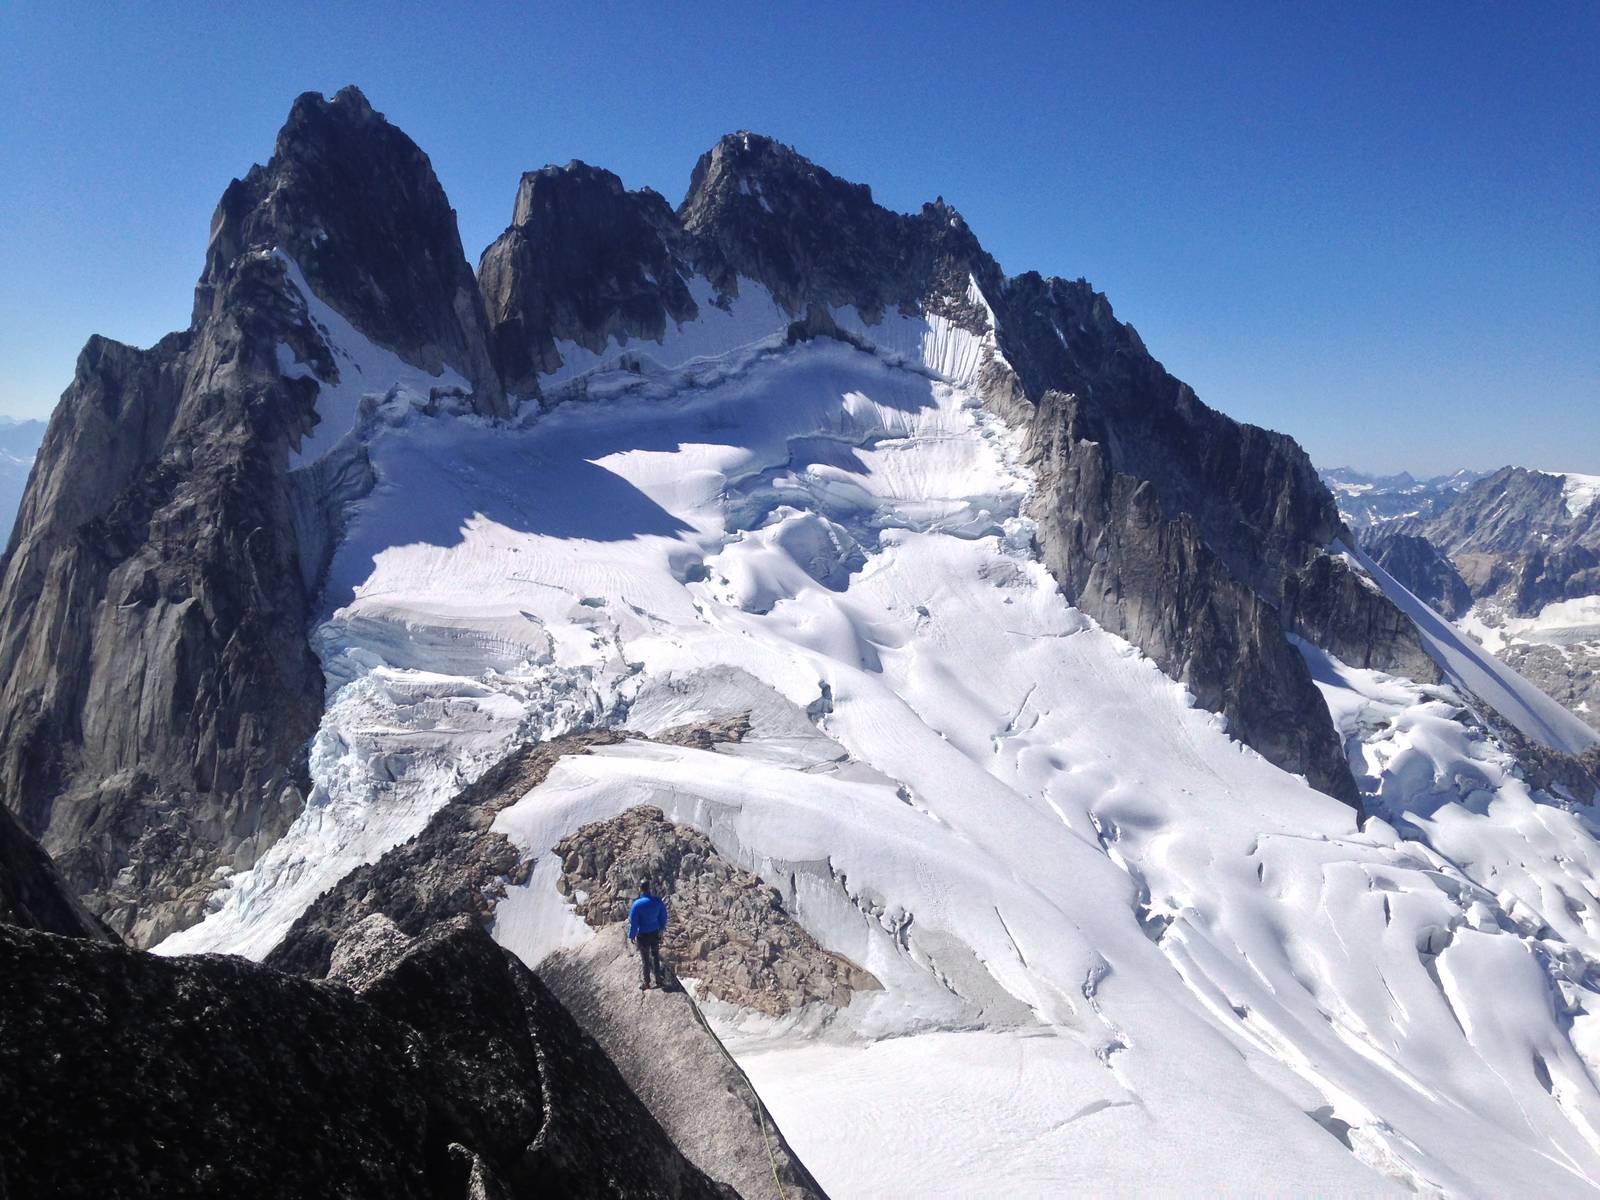 Humbling sights (and scary ridges) in the Bugaboos